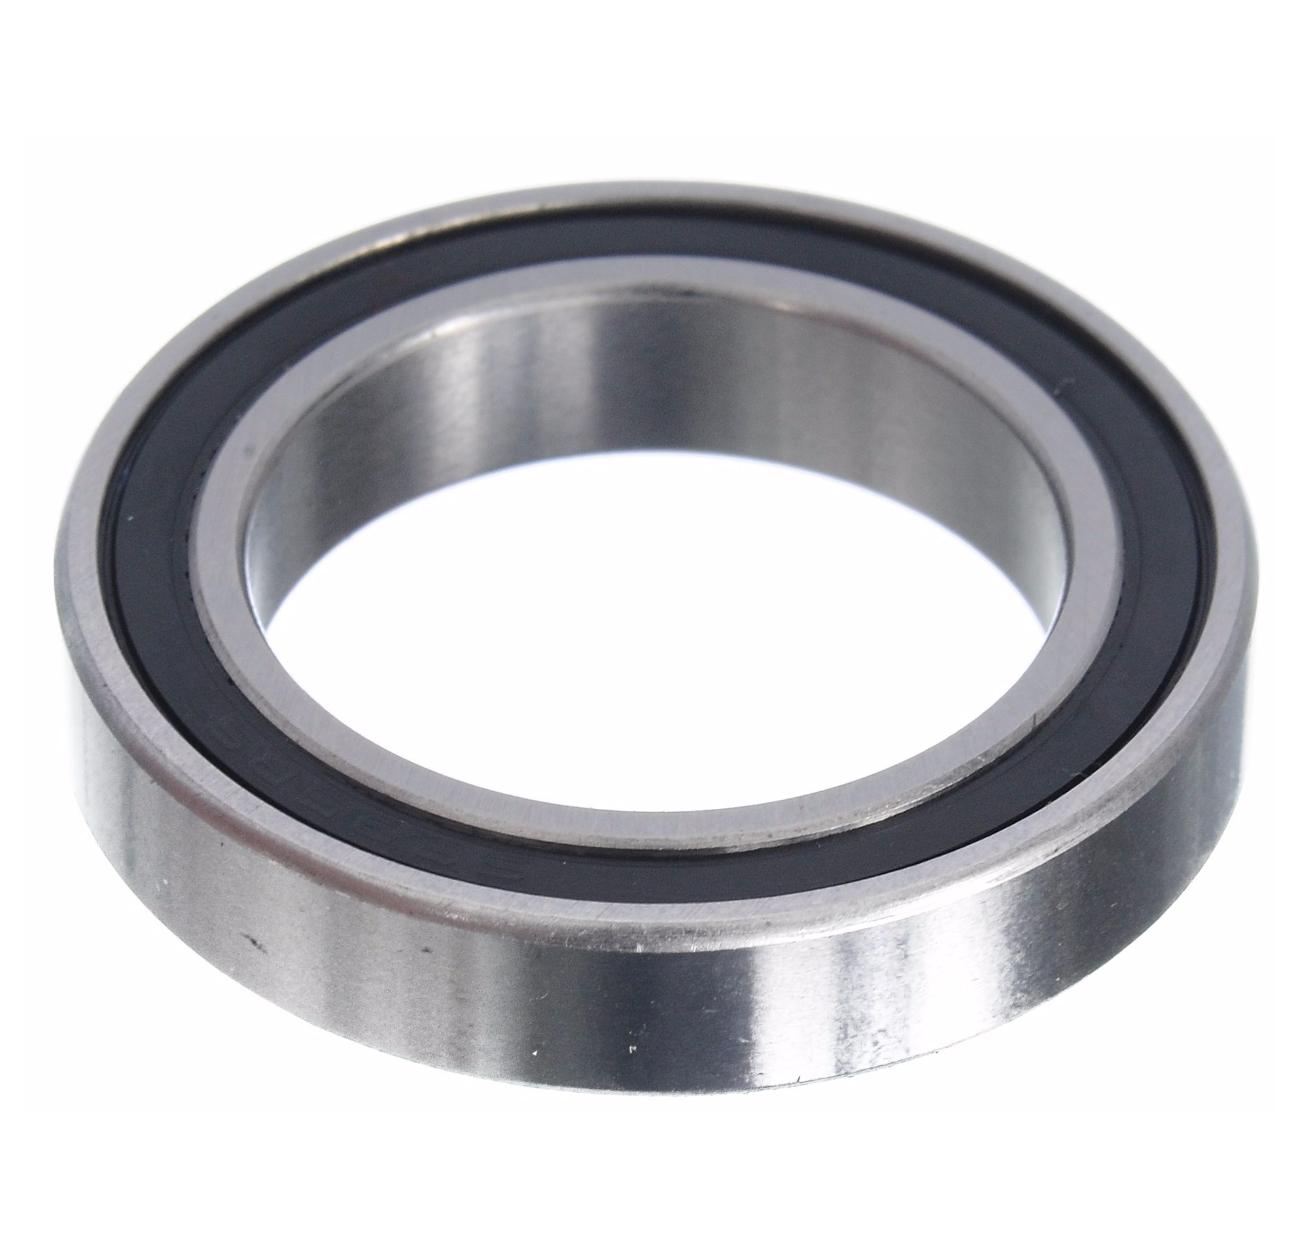 Brand-x Sealed Bearing (6805 2rs)  Silver